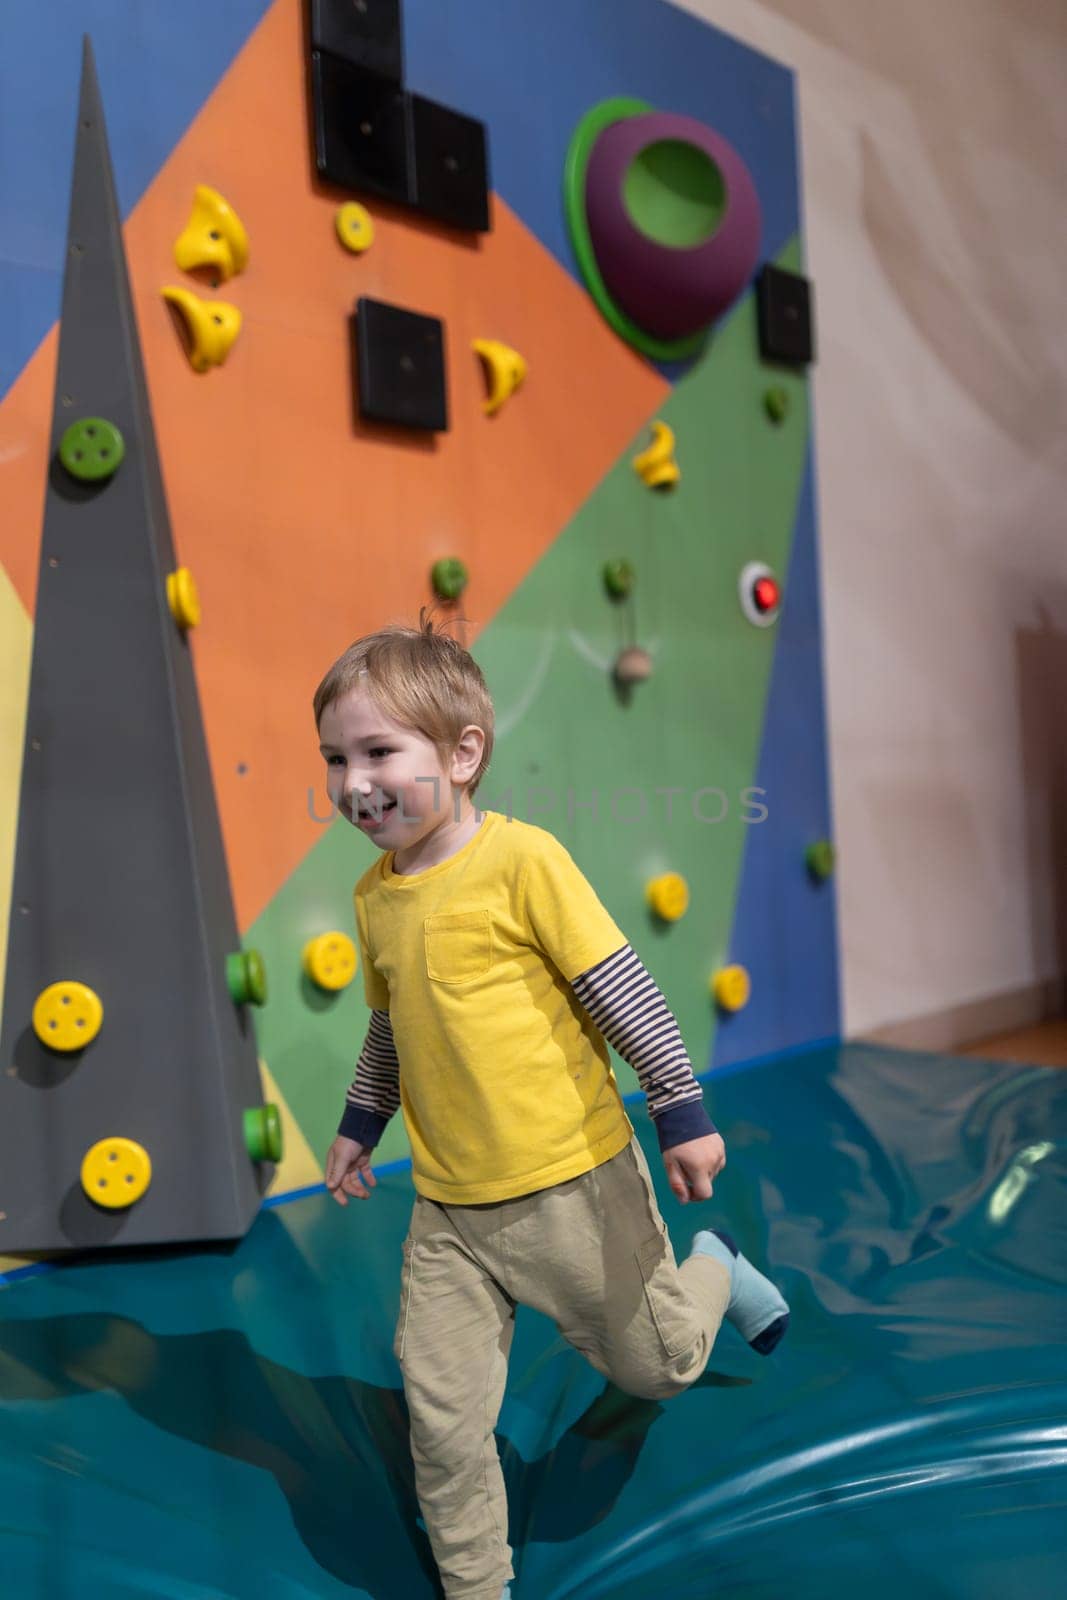 A young boy is running on a blue surface with a yellow shirt on by Studia72